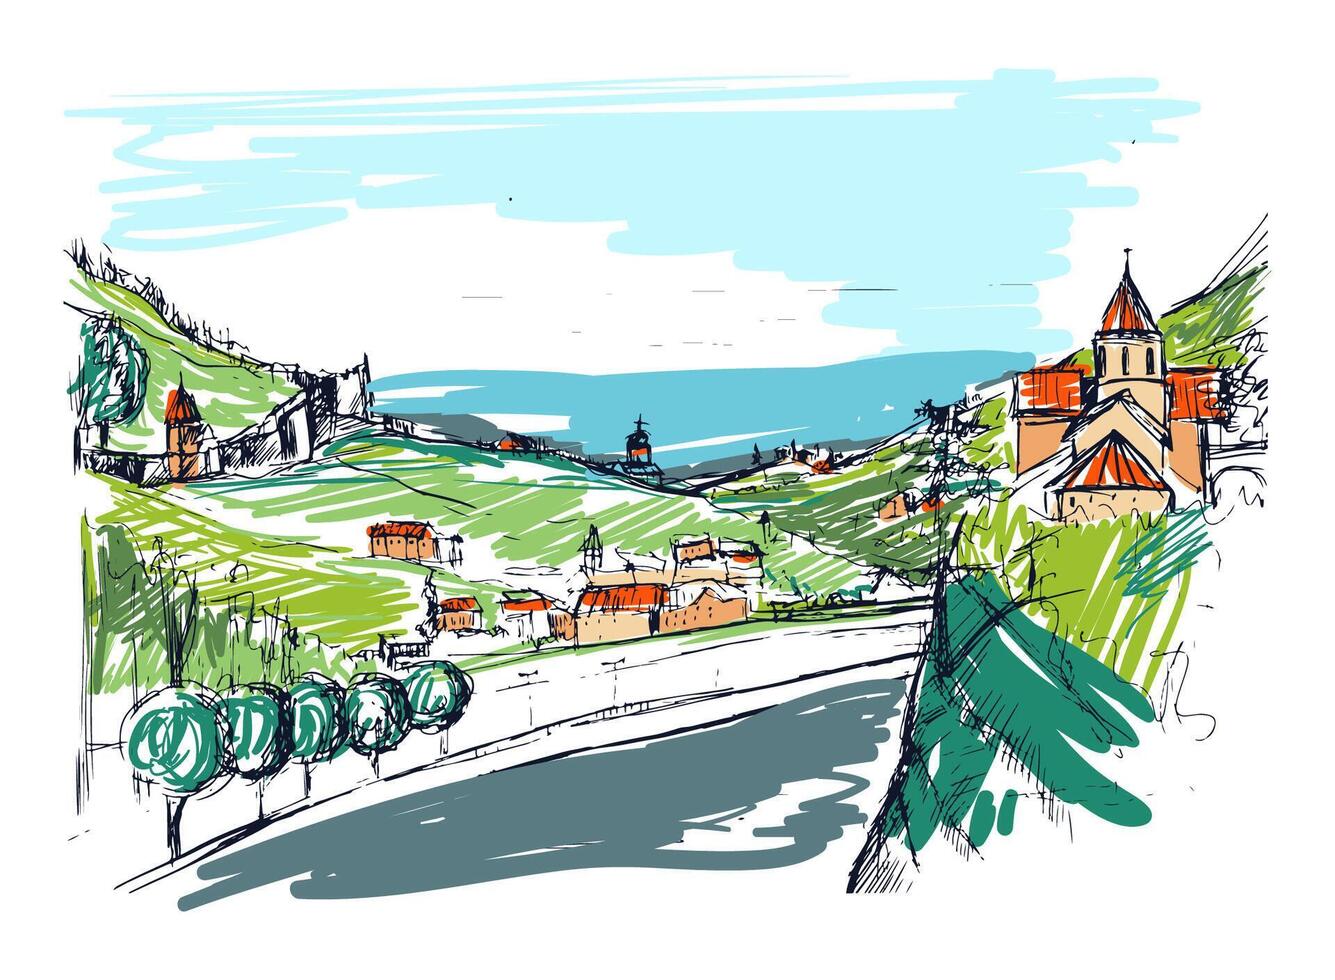 Rough draft of small Georgian town street, buildings and trees against mountains on background. Landscape with settlement located near hills hand drawn. Colored sketch vector illustration.